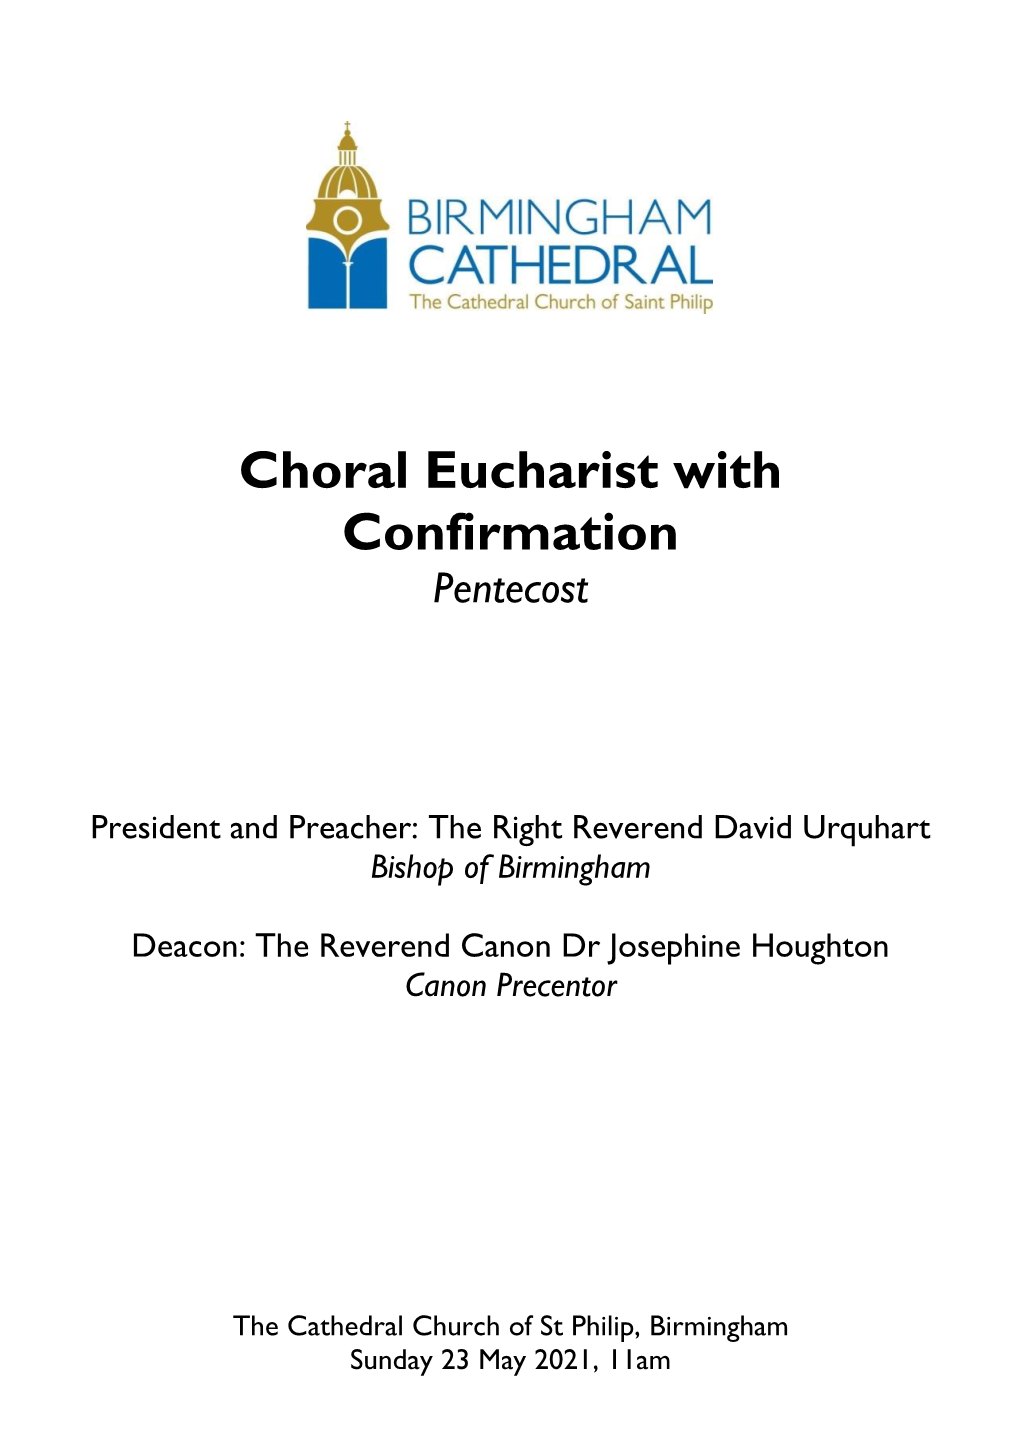 Choral Eucharist with Confirmation Pentecost